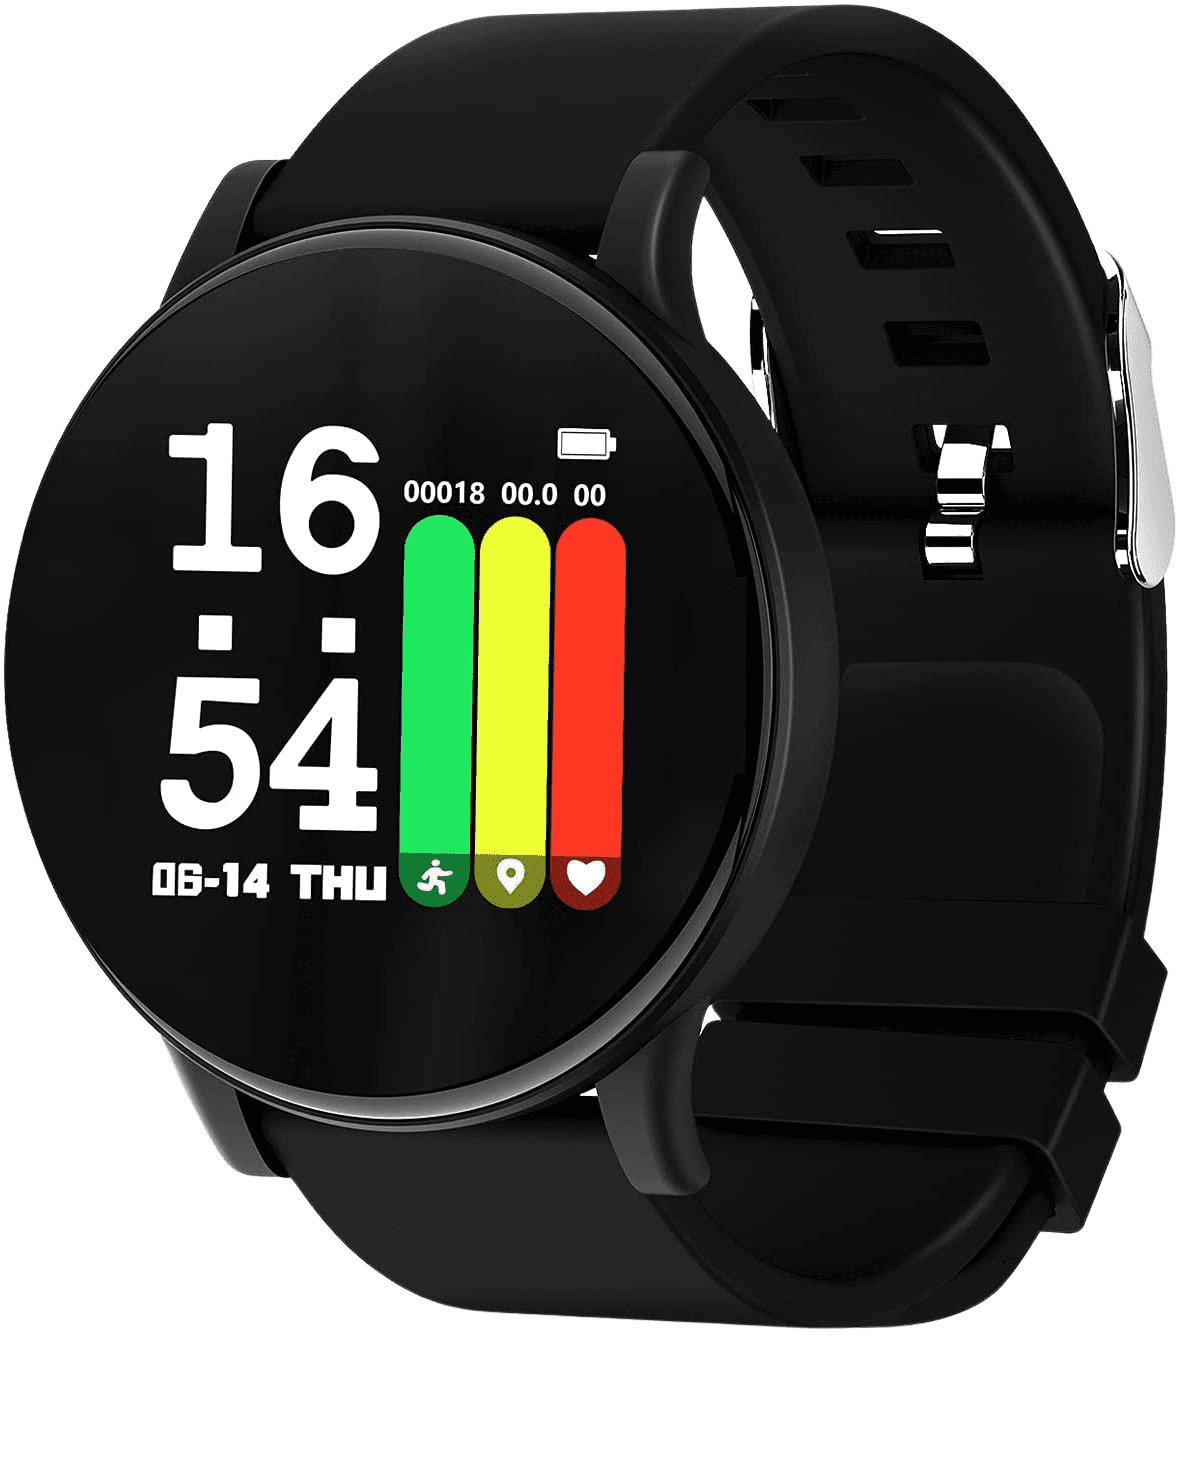 Smart Watch Fitness Tracker Temperature Monitor Sport Digital Watch 1.3 in with Heart Rate Sleep Monitor Step Counter IP67 Waterproof for Men Women - Home Decor Gifts and More